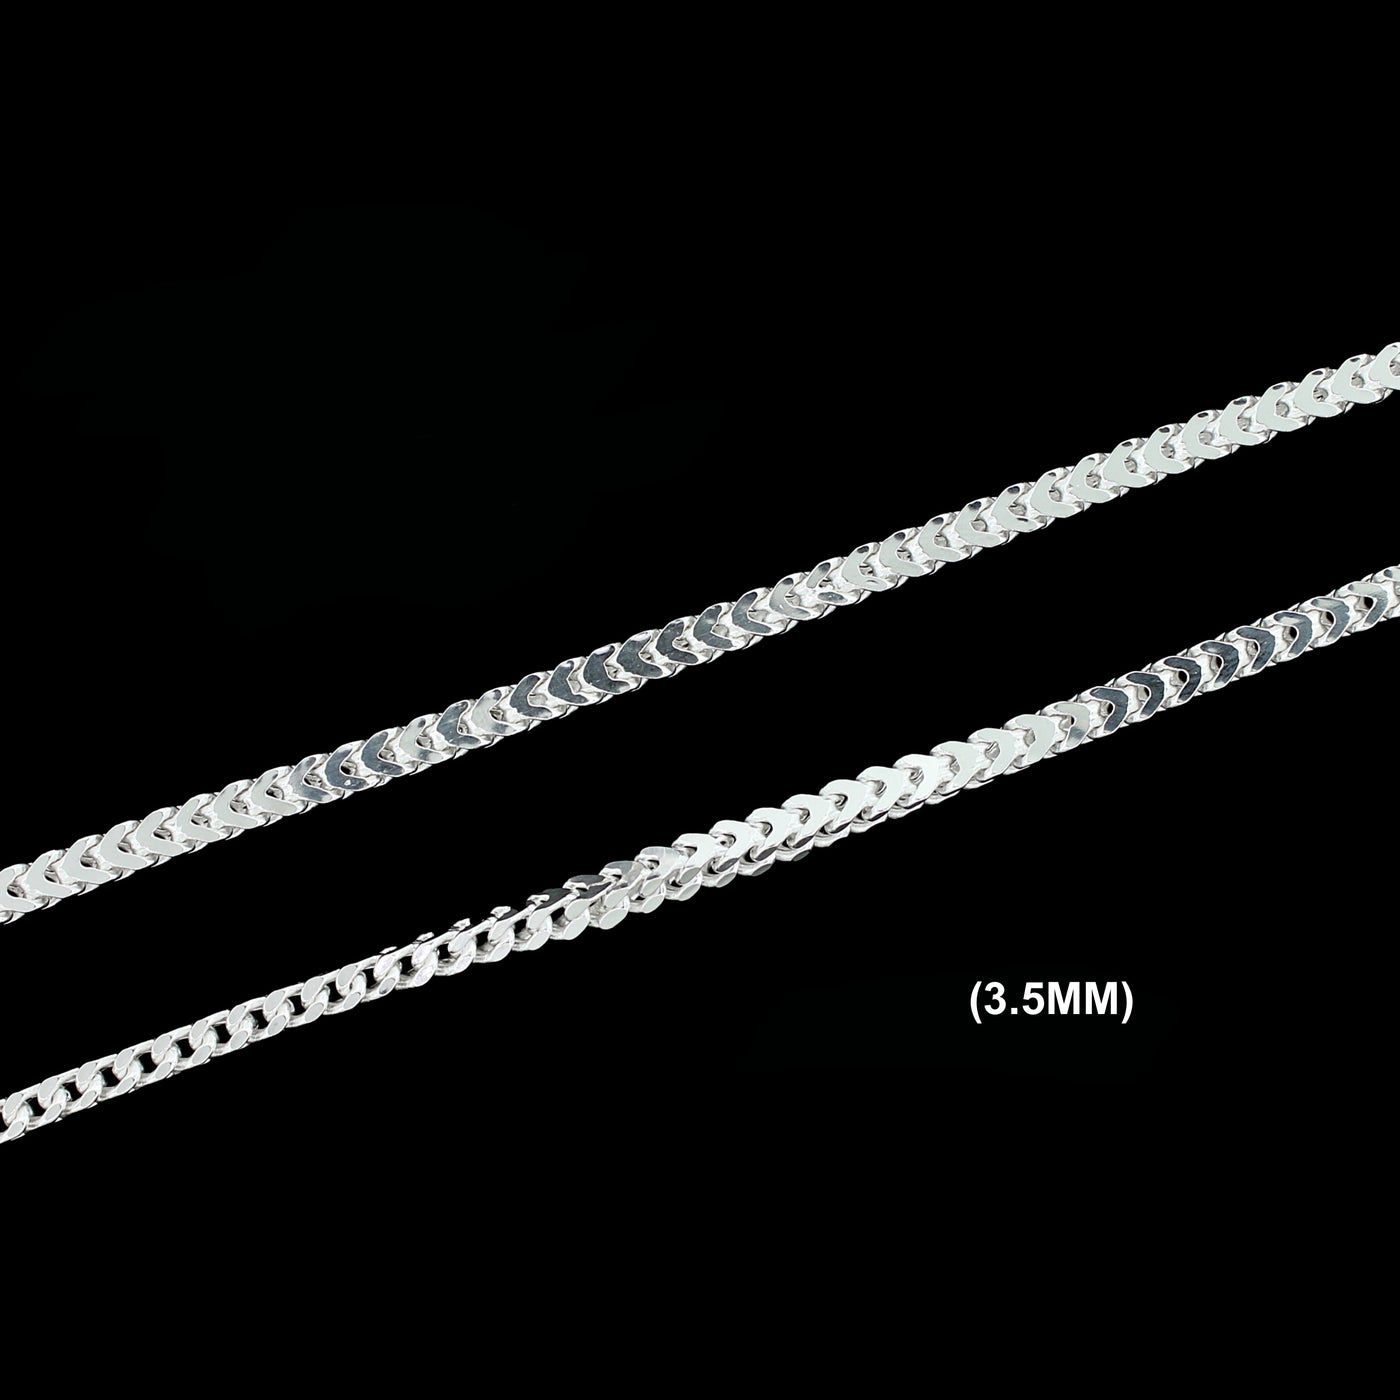 3.5MM Solid 925 Sterling Silver Franco Link Chain Necklace or Bracelet ITALY